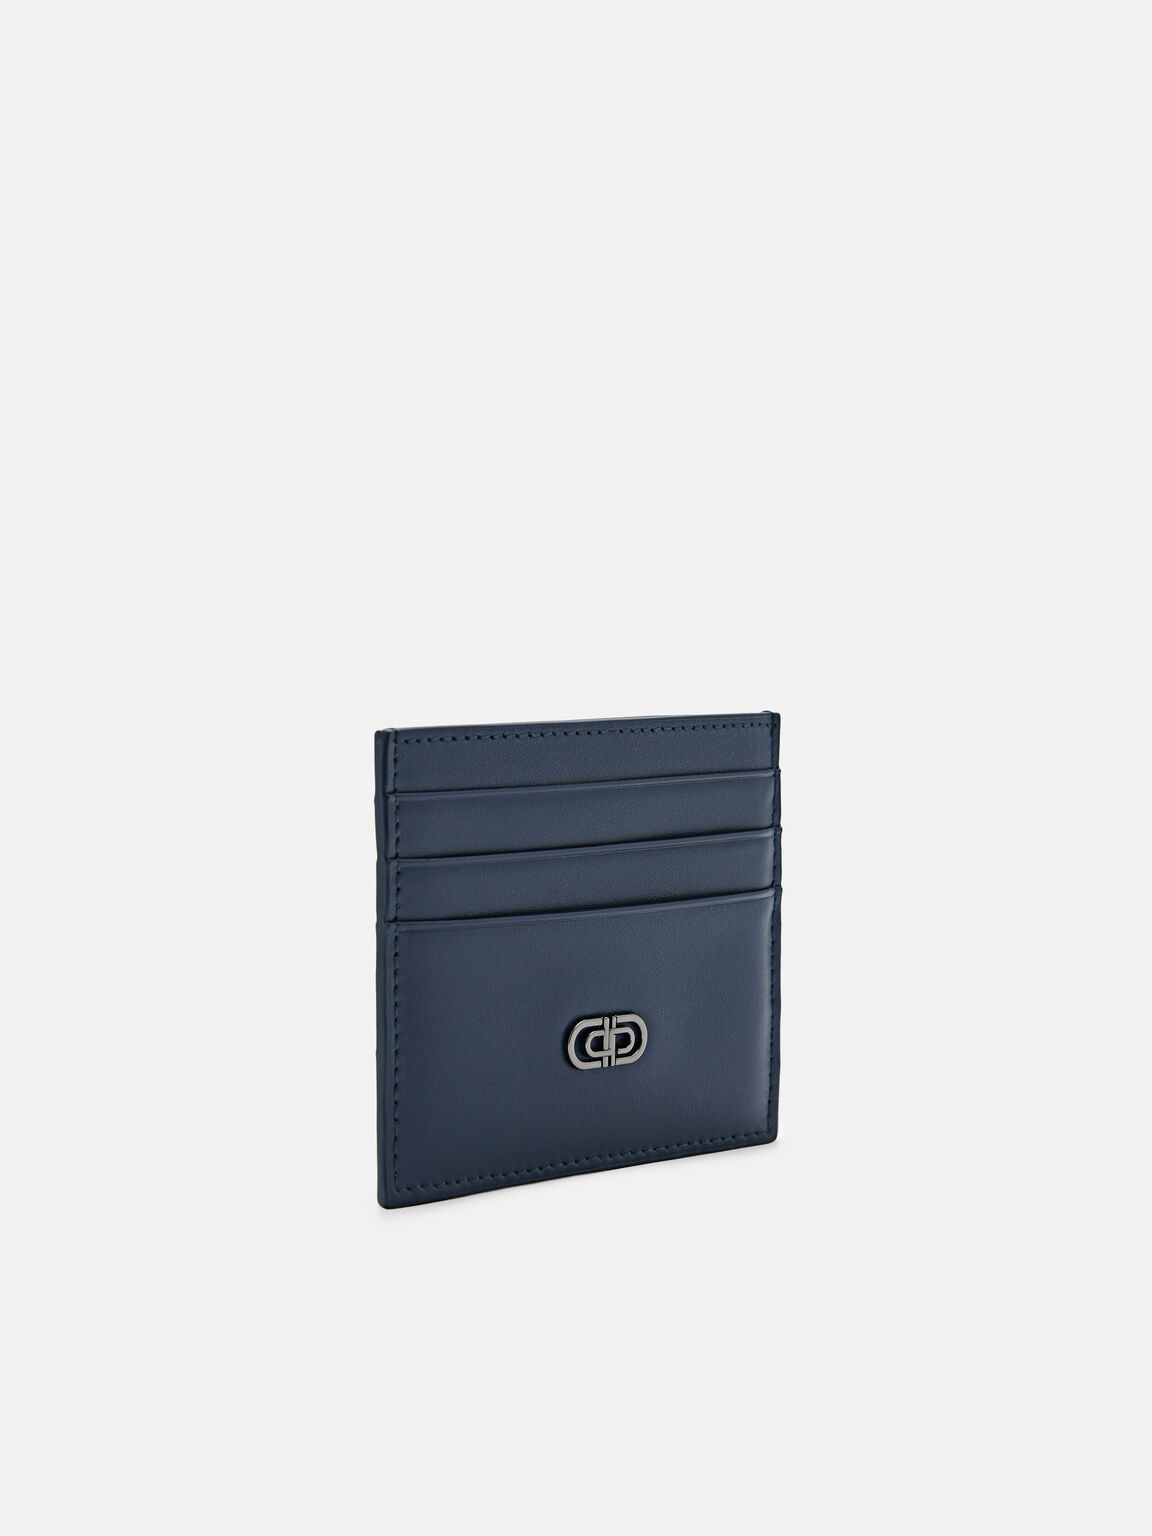 PEDRO Icon Leather Card Holder, Navy, hi-res